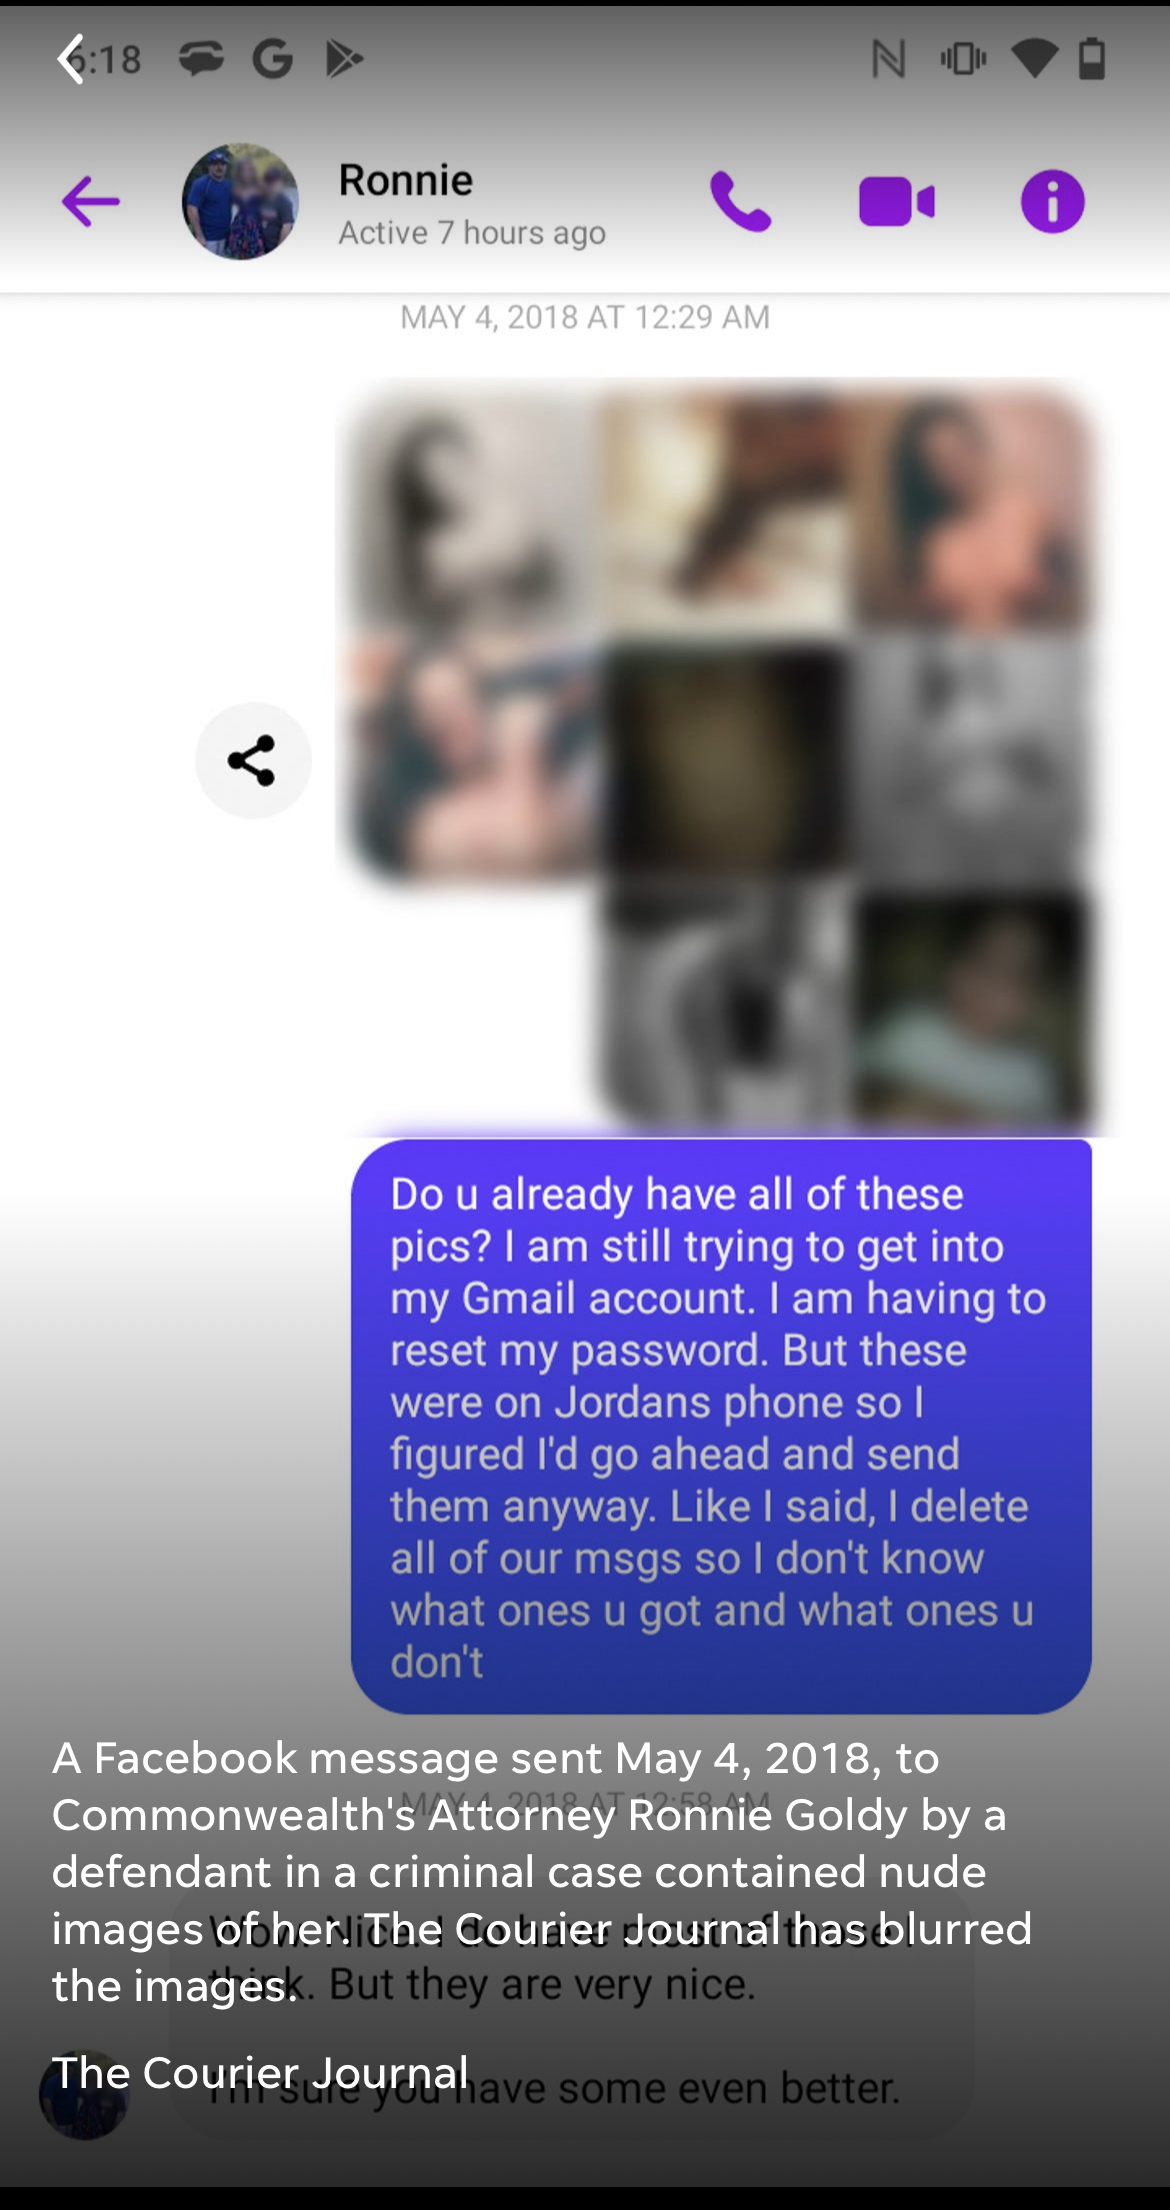 Courier Journal screenshot of messages exchanged by prosecutor and defendant of Facebook messenger 